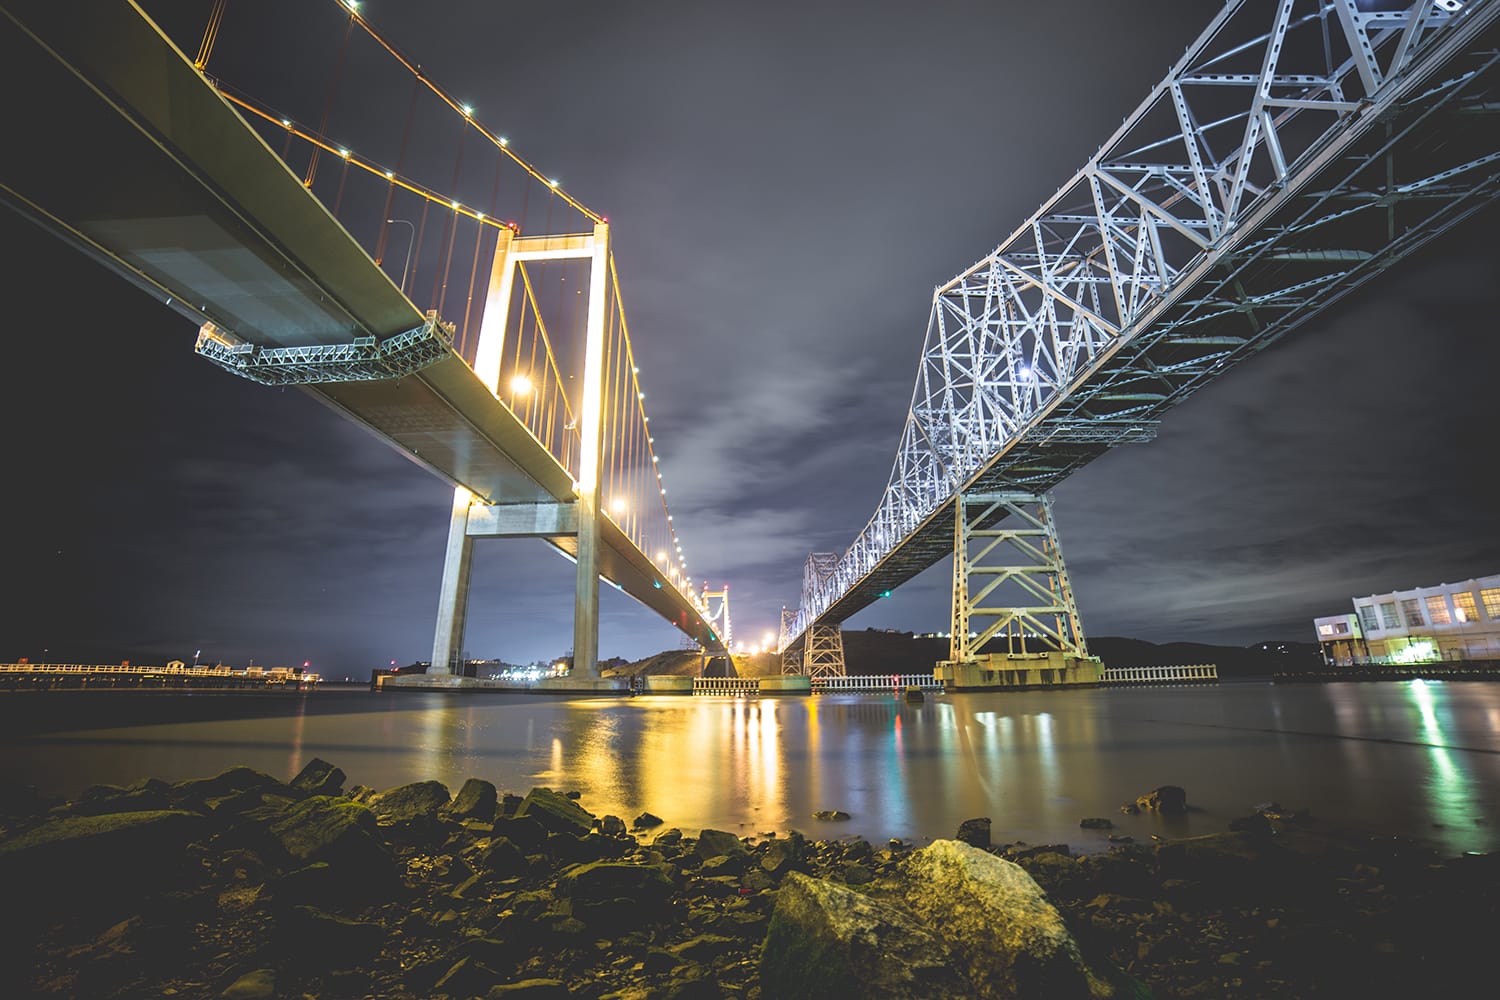 9 Expert Tips for Photographing Bridges & Capturing Architecture at Night